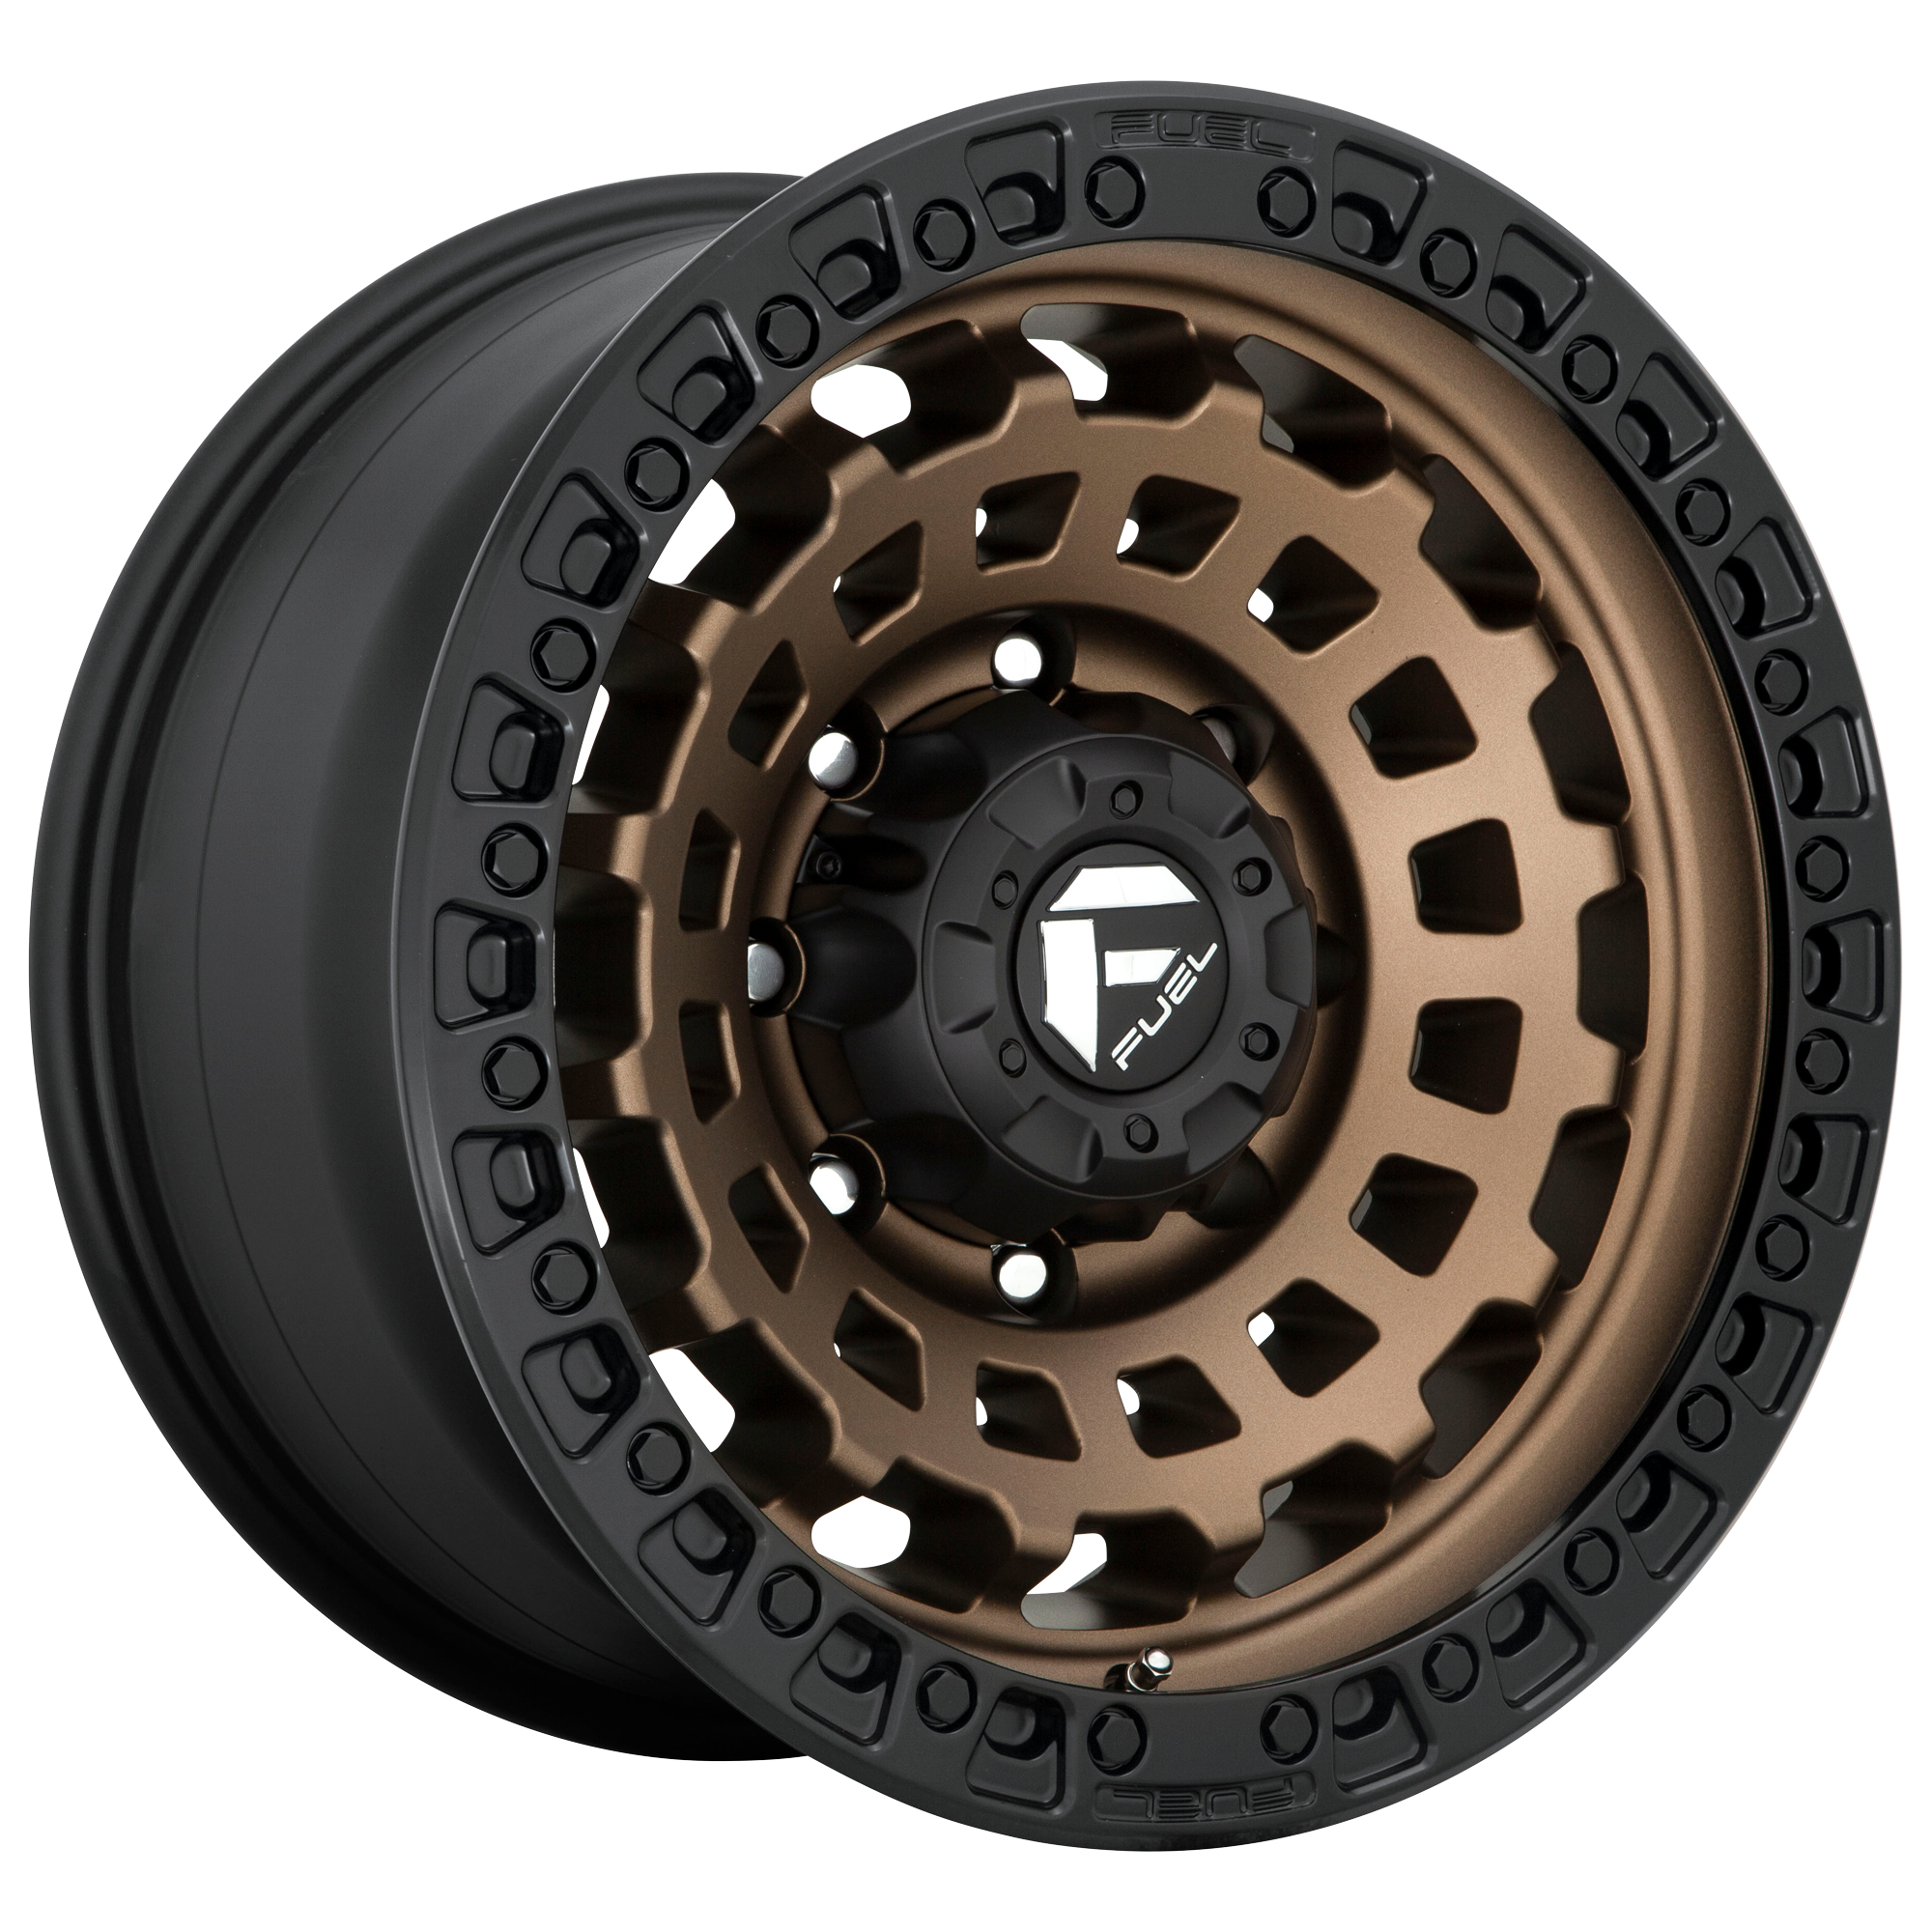 ZEPHYR 20x9 6x139.70 MATTE BRONZE BLACK BEAD RING (1 mm) - Tires and Engine Performance